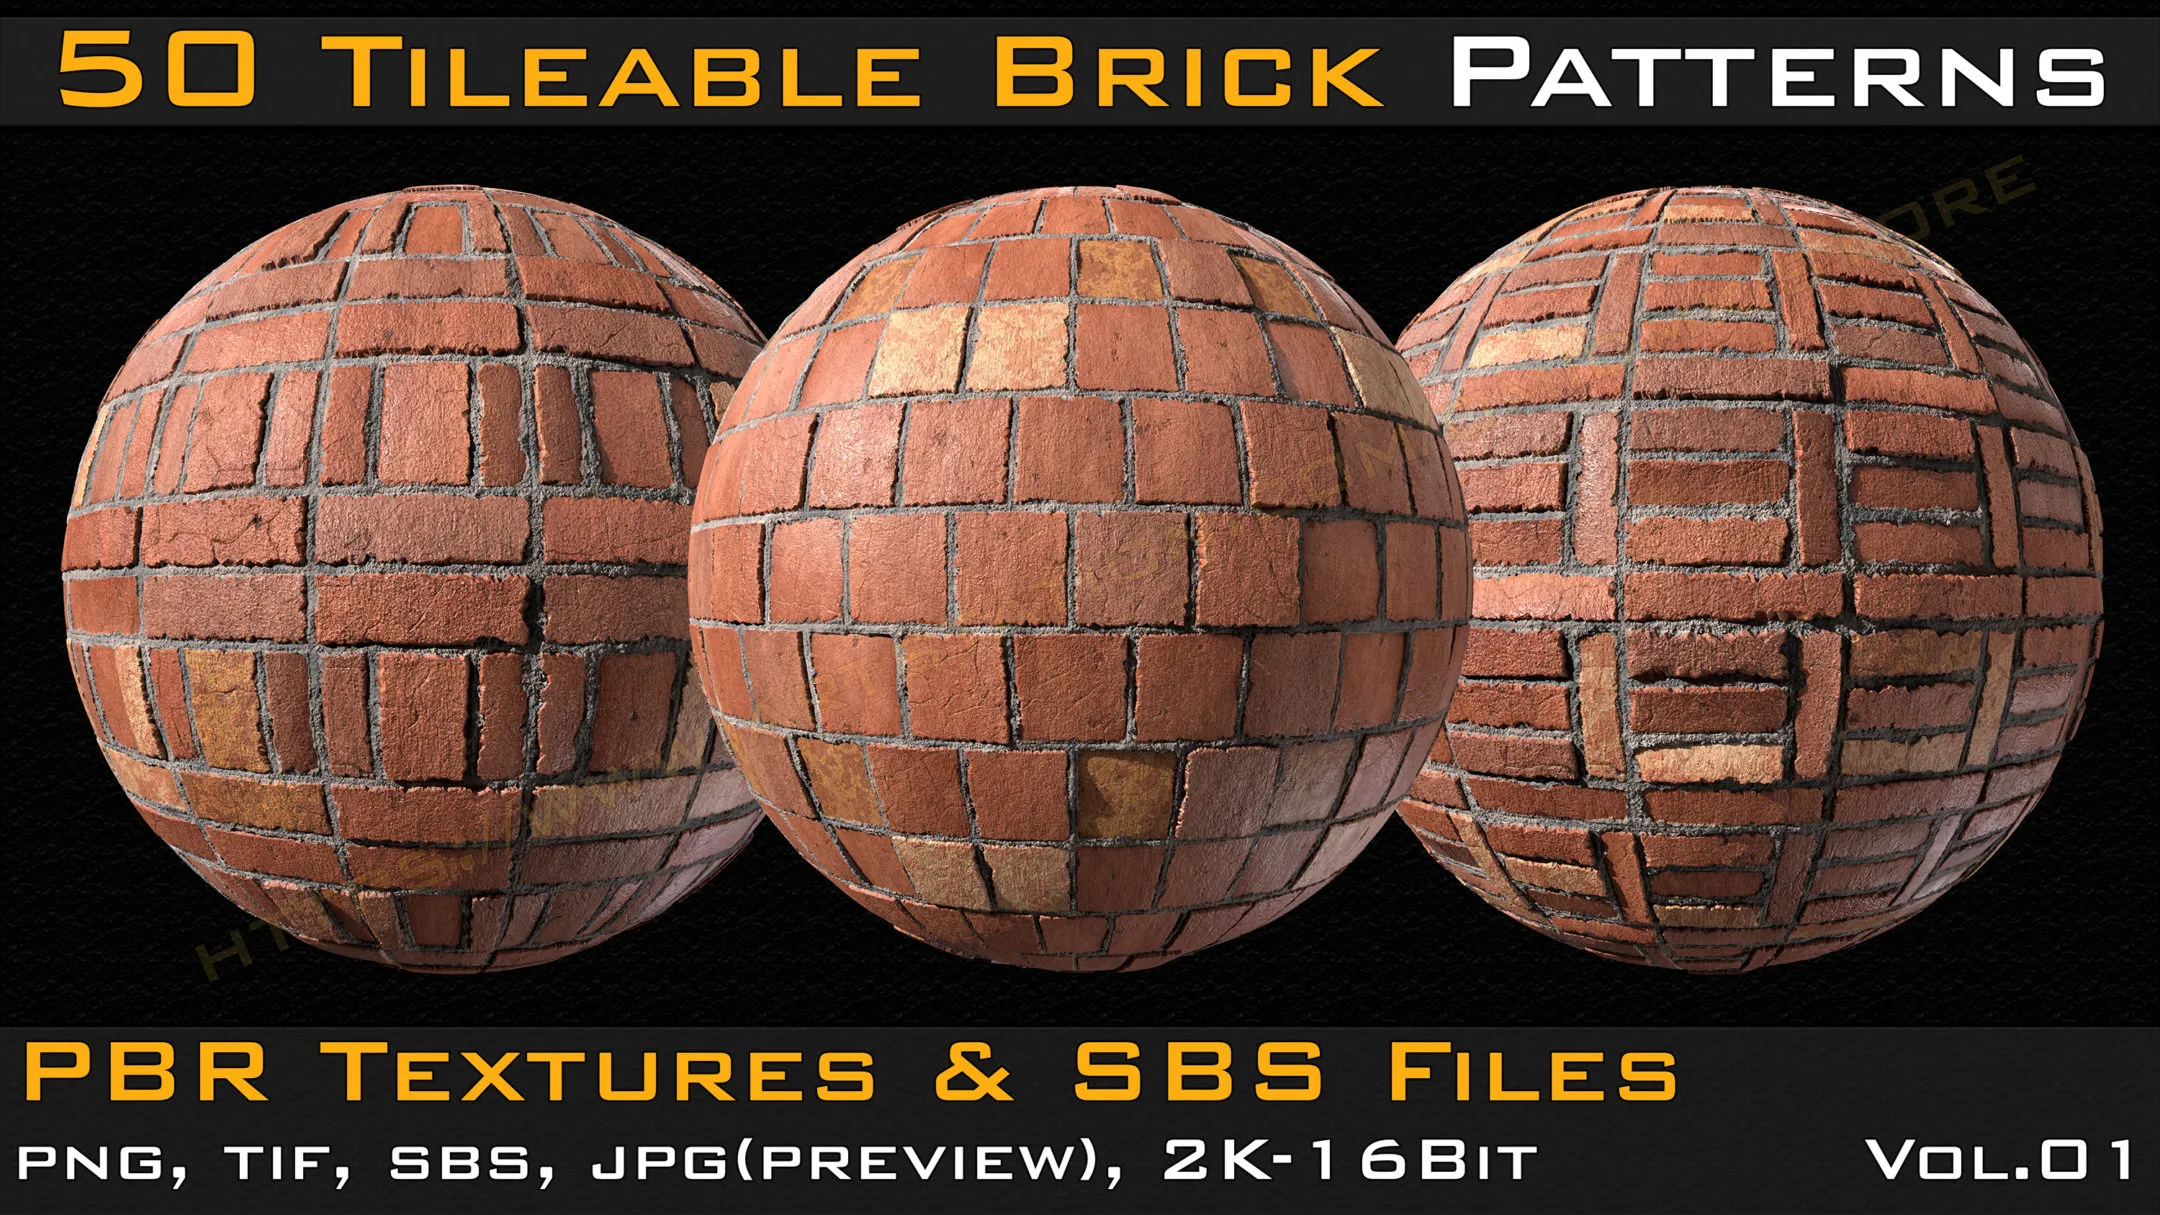 50 Tileable Brick Patterns & PBR Textures and Sbs Files - VOL 01